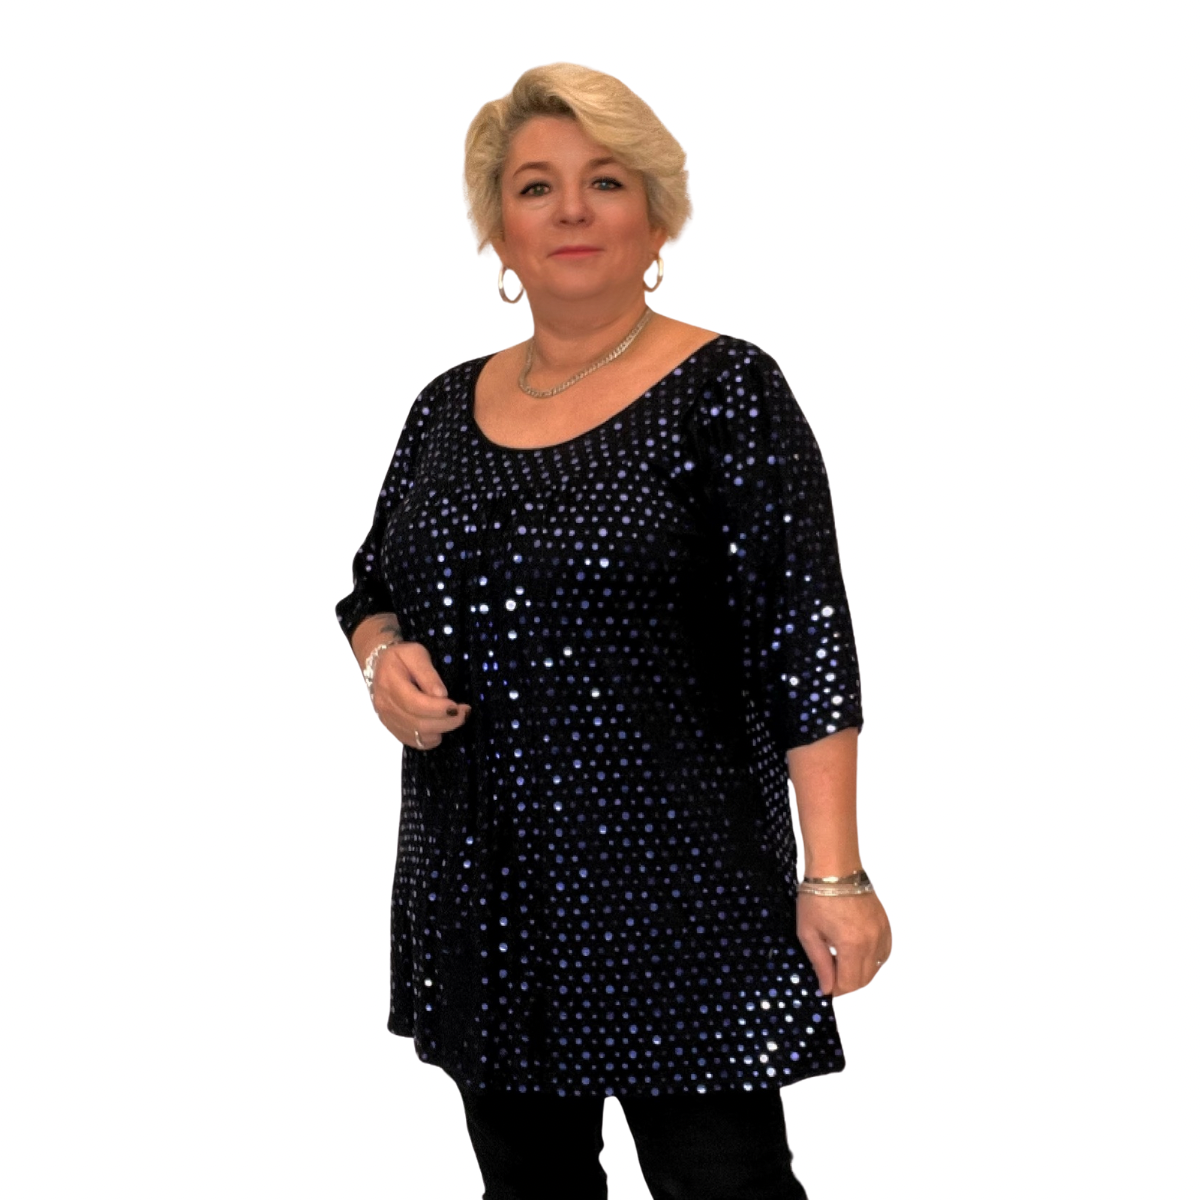 BLACK SEQUIN COVERED SHORT SLEEVE SMOCK TOP